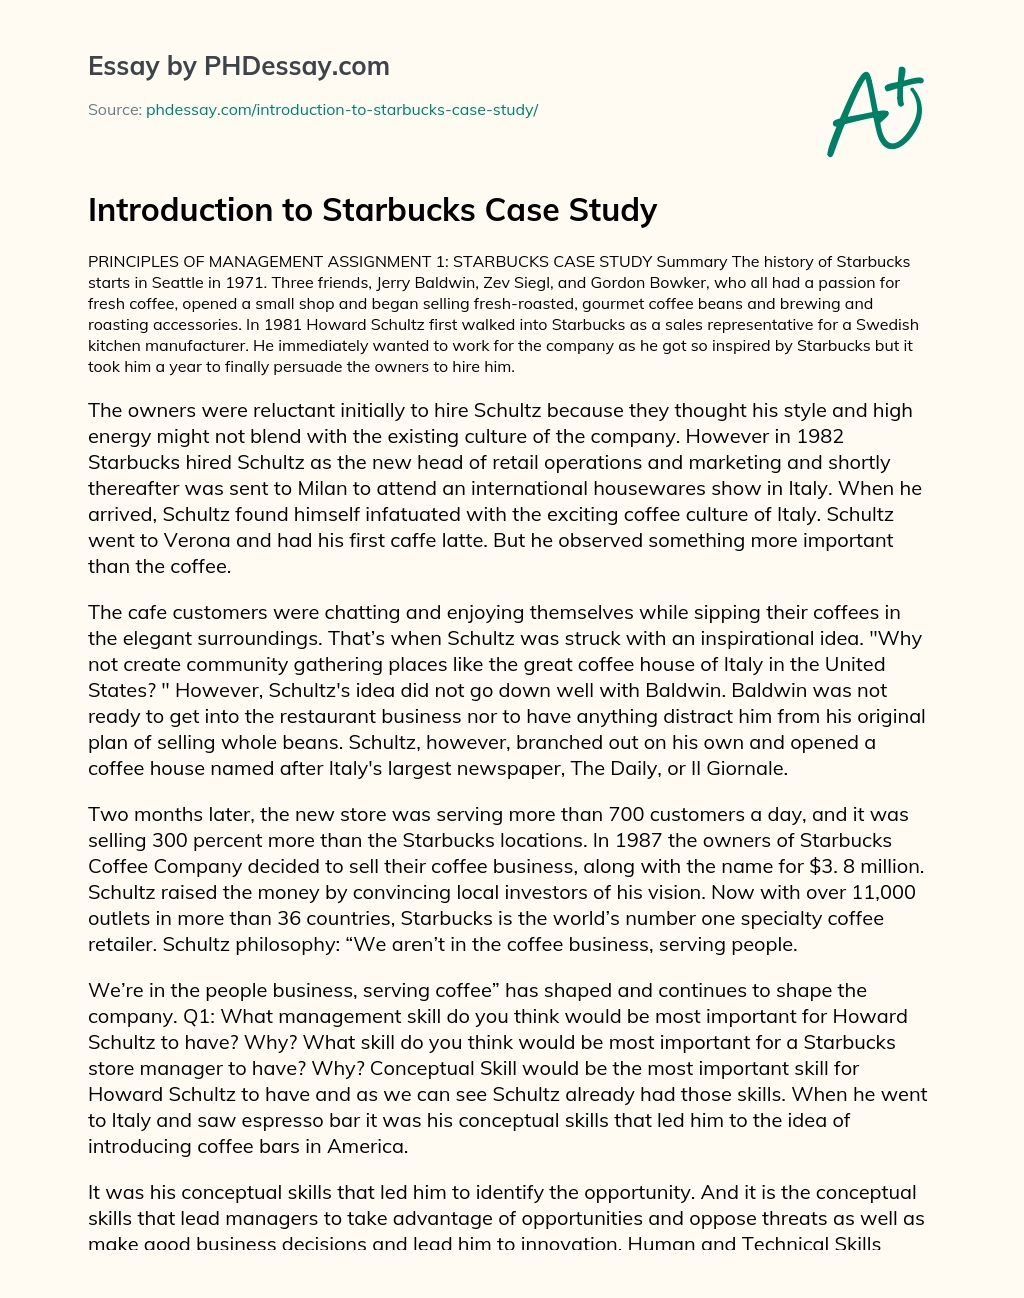 Introduction to Starbucks Case Study essay